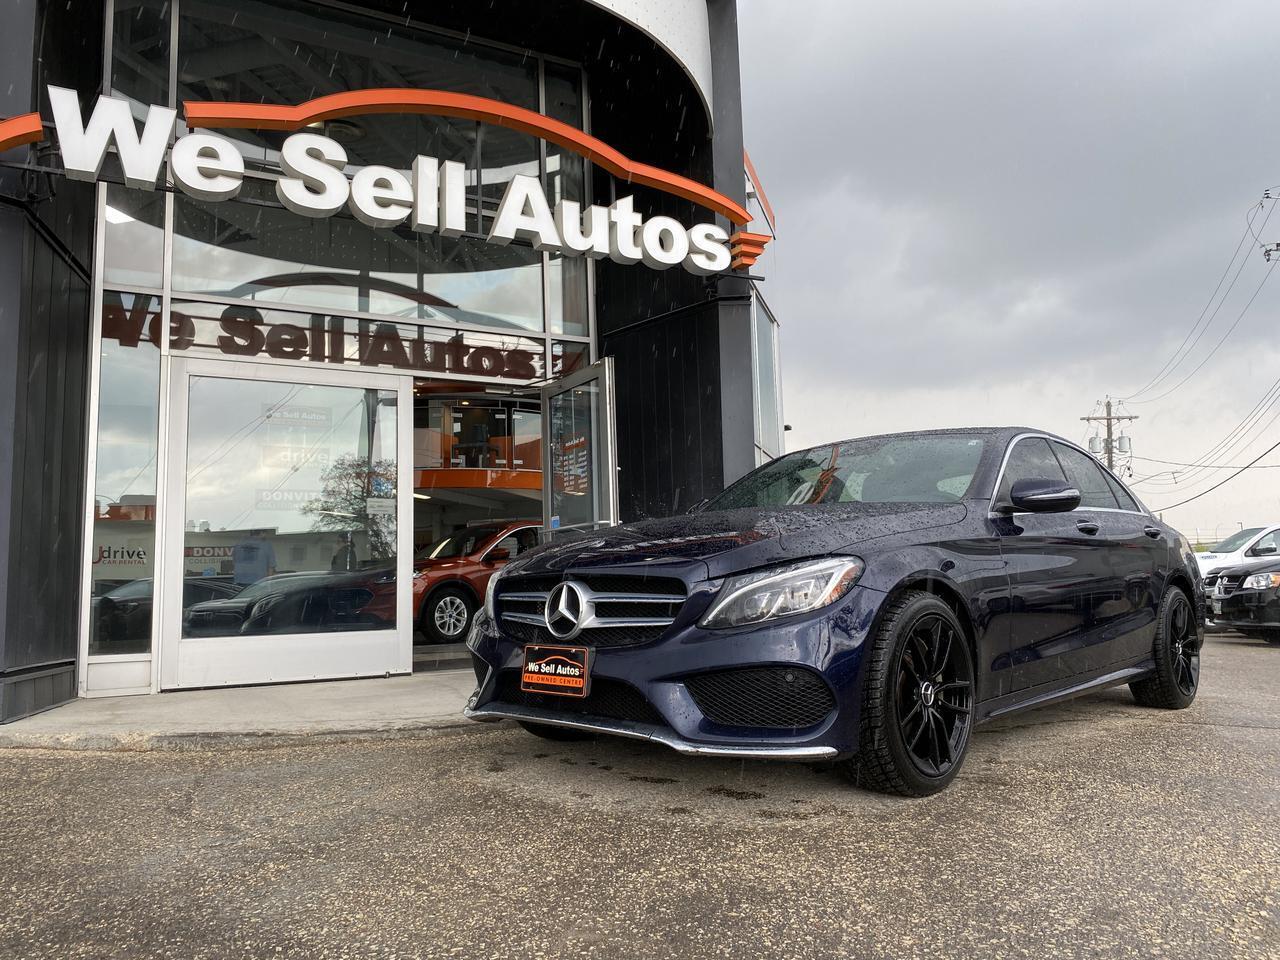 2018 Mercedes-Benz C-Class C 300 w/Panorama Moonroof, Navigation, LOADED!